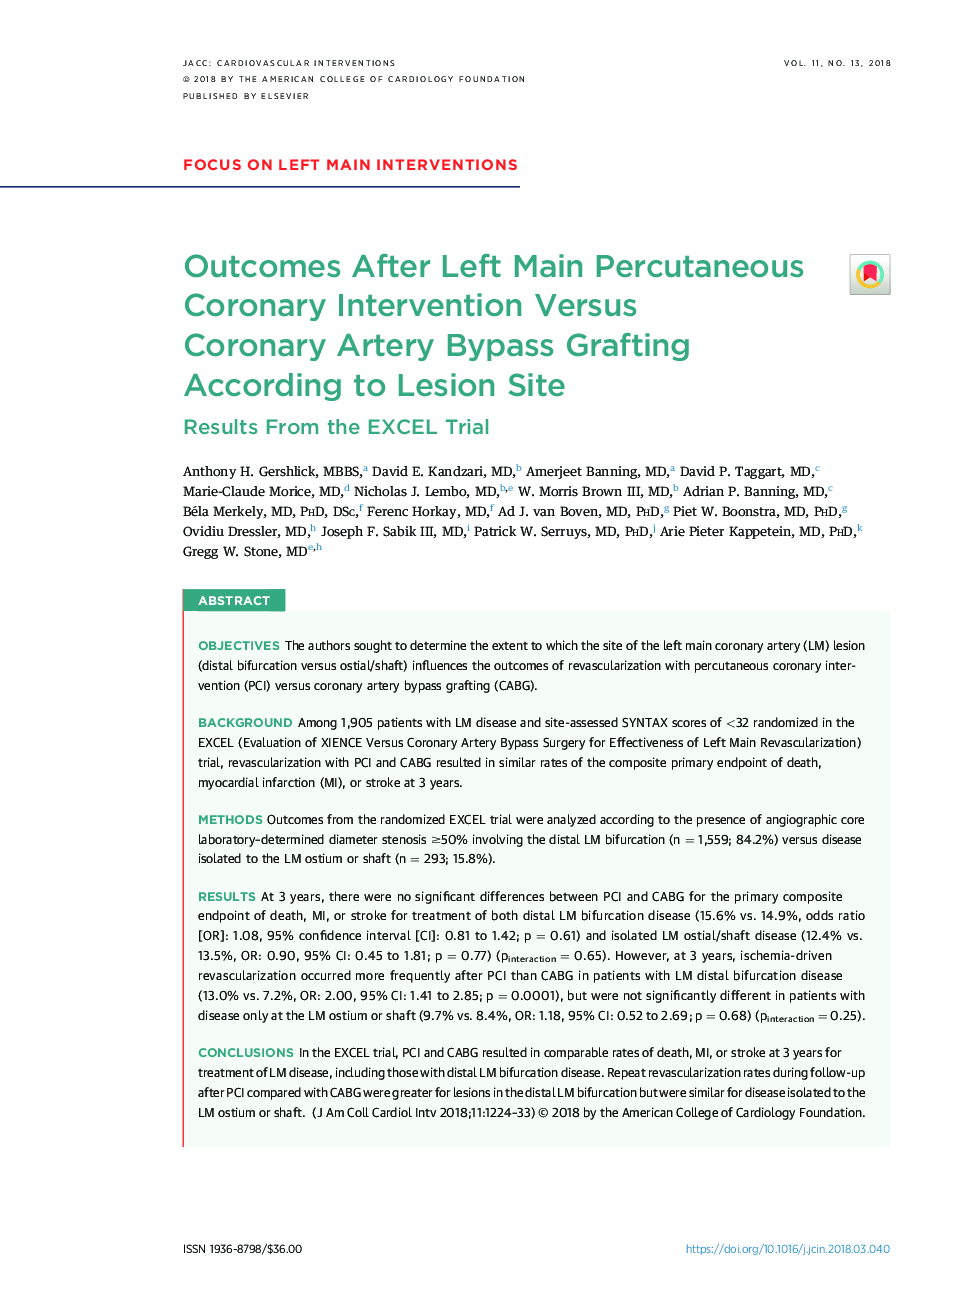 Outcomes After Left Main Percutaneous Coronary Intervention Versus CoronaryÂ Artery Bypass Grafting According to Lesion Site